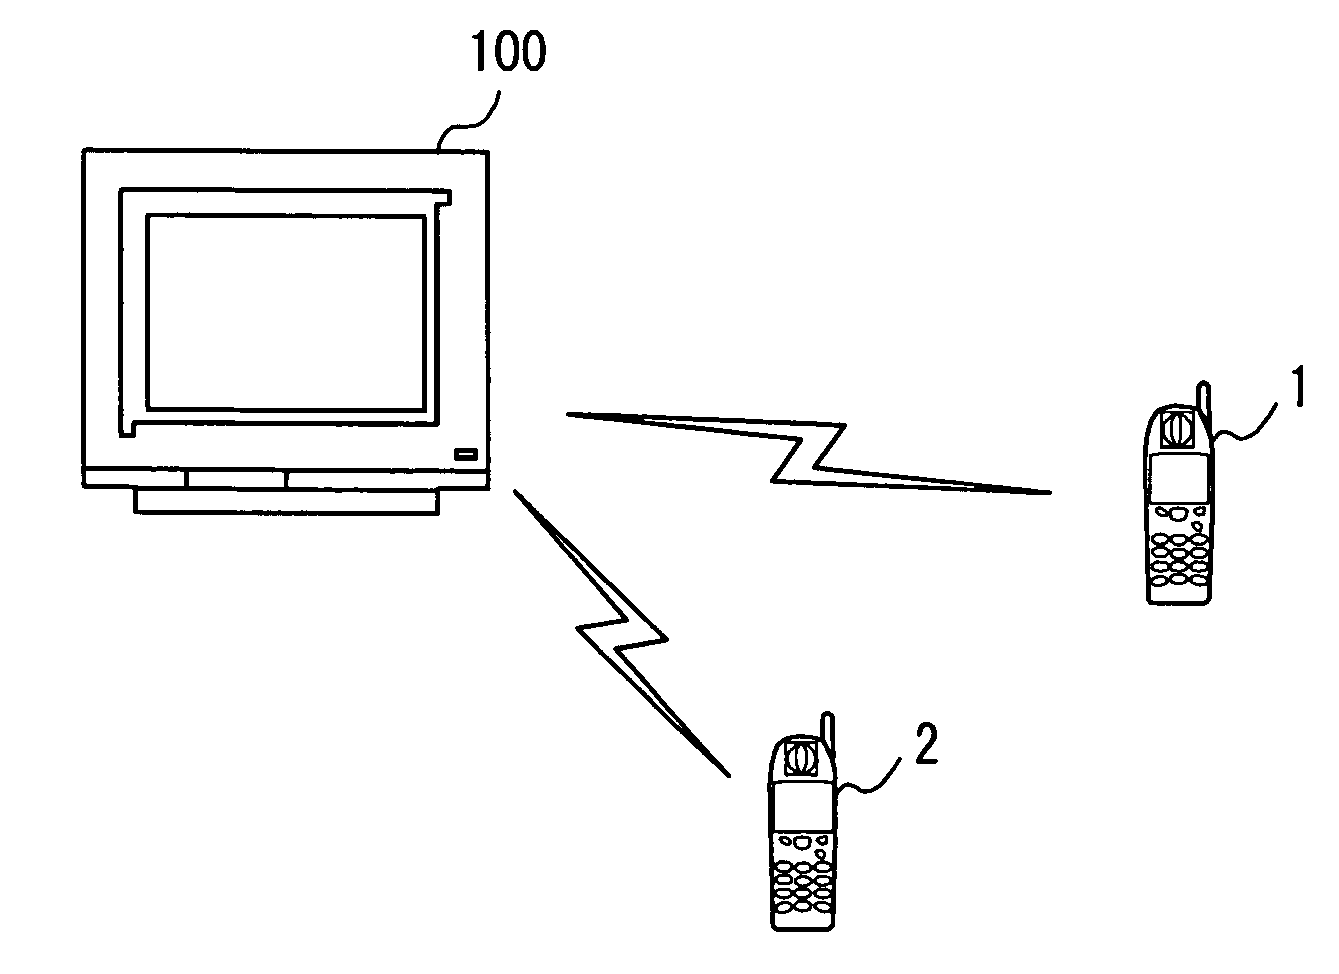 Cellular phone control apparatus, method of controlling same and hands-free call placement apparatus